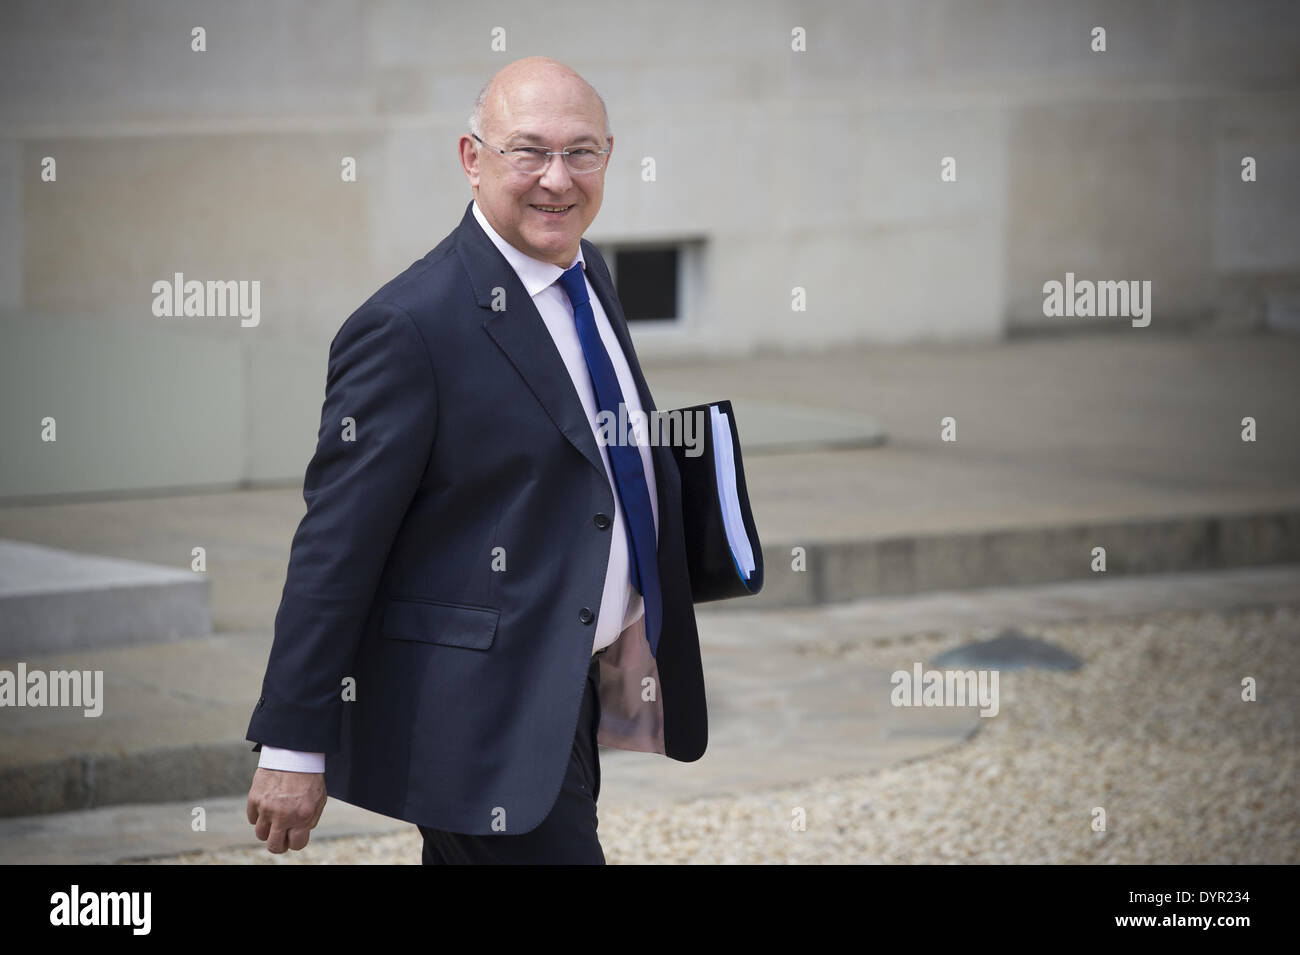 Paris, FRA. 23rd Apr, 2014. French Finance Minister Michel Sapin leaves the Elysee palace on April 23, 2014, in Paris, after the weekly cabinet meeting. (Photo/Zacharie Scheurer) © Zacharie Scheurer/NurPhoto/ZUMAPRESS.com/Alamy Live News Stock Photo